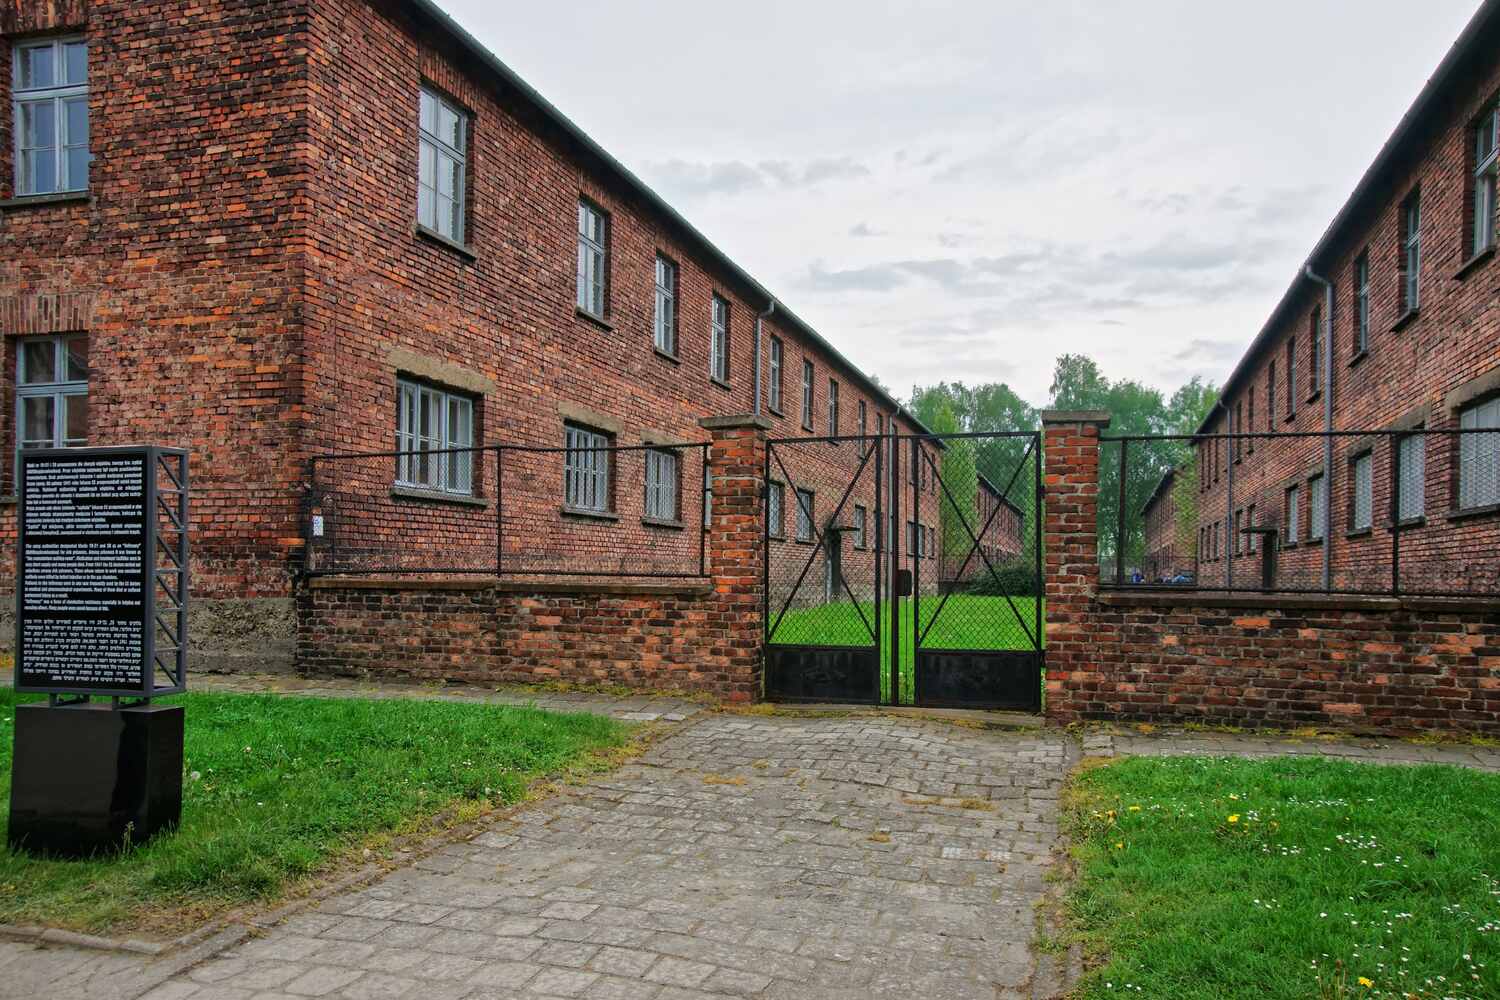 Courtyard of a red brick prison or barracks.